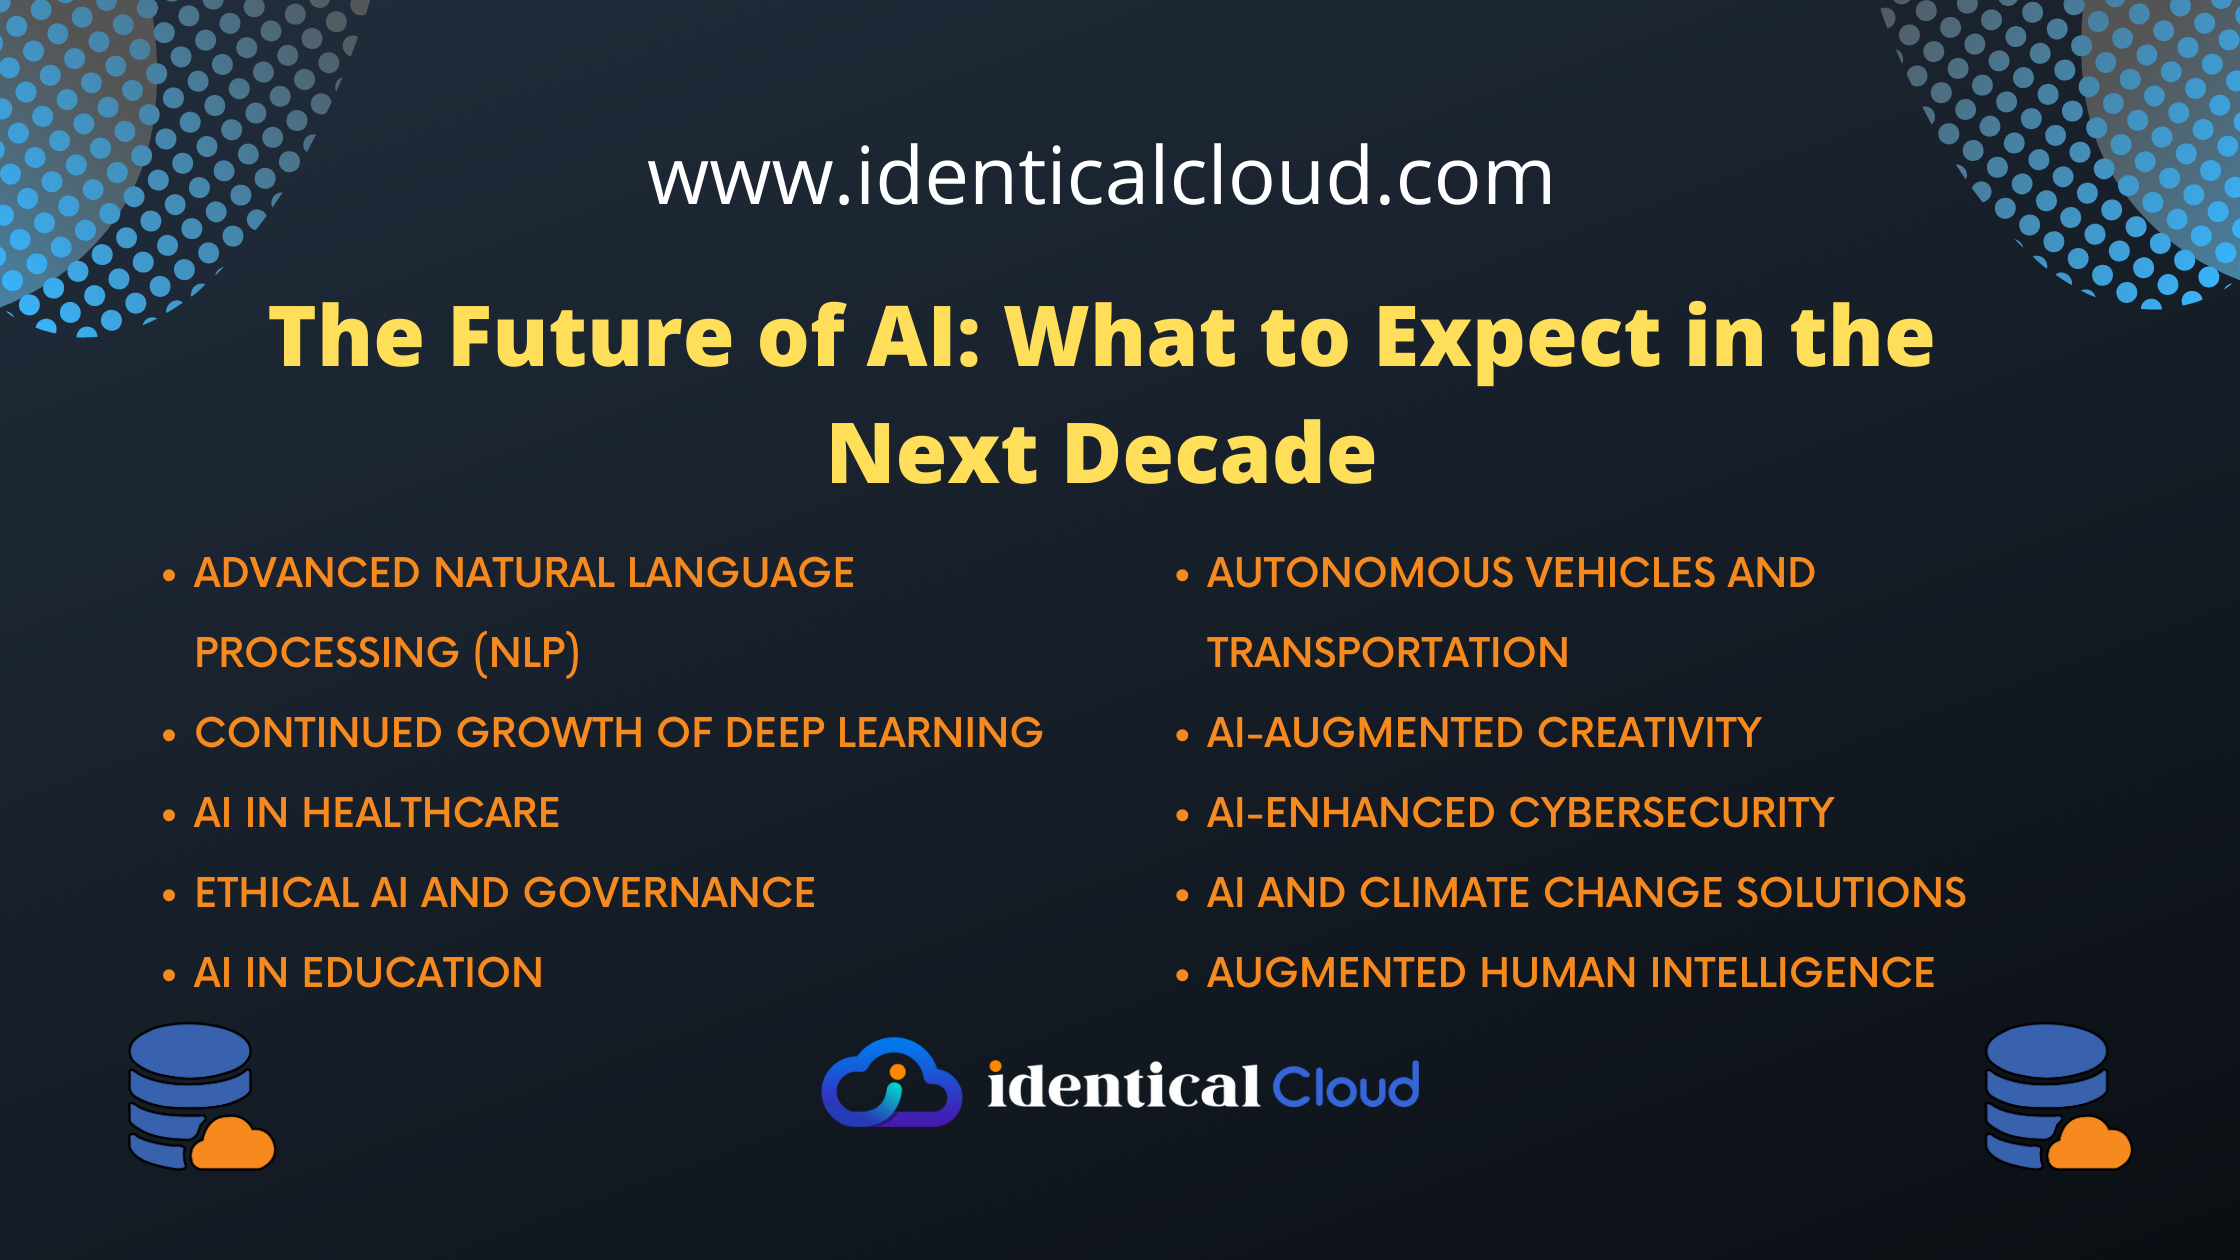 The Future of AI: What to Expect in the Next Decade - identicalcloud.com